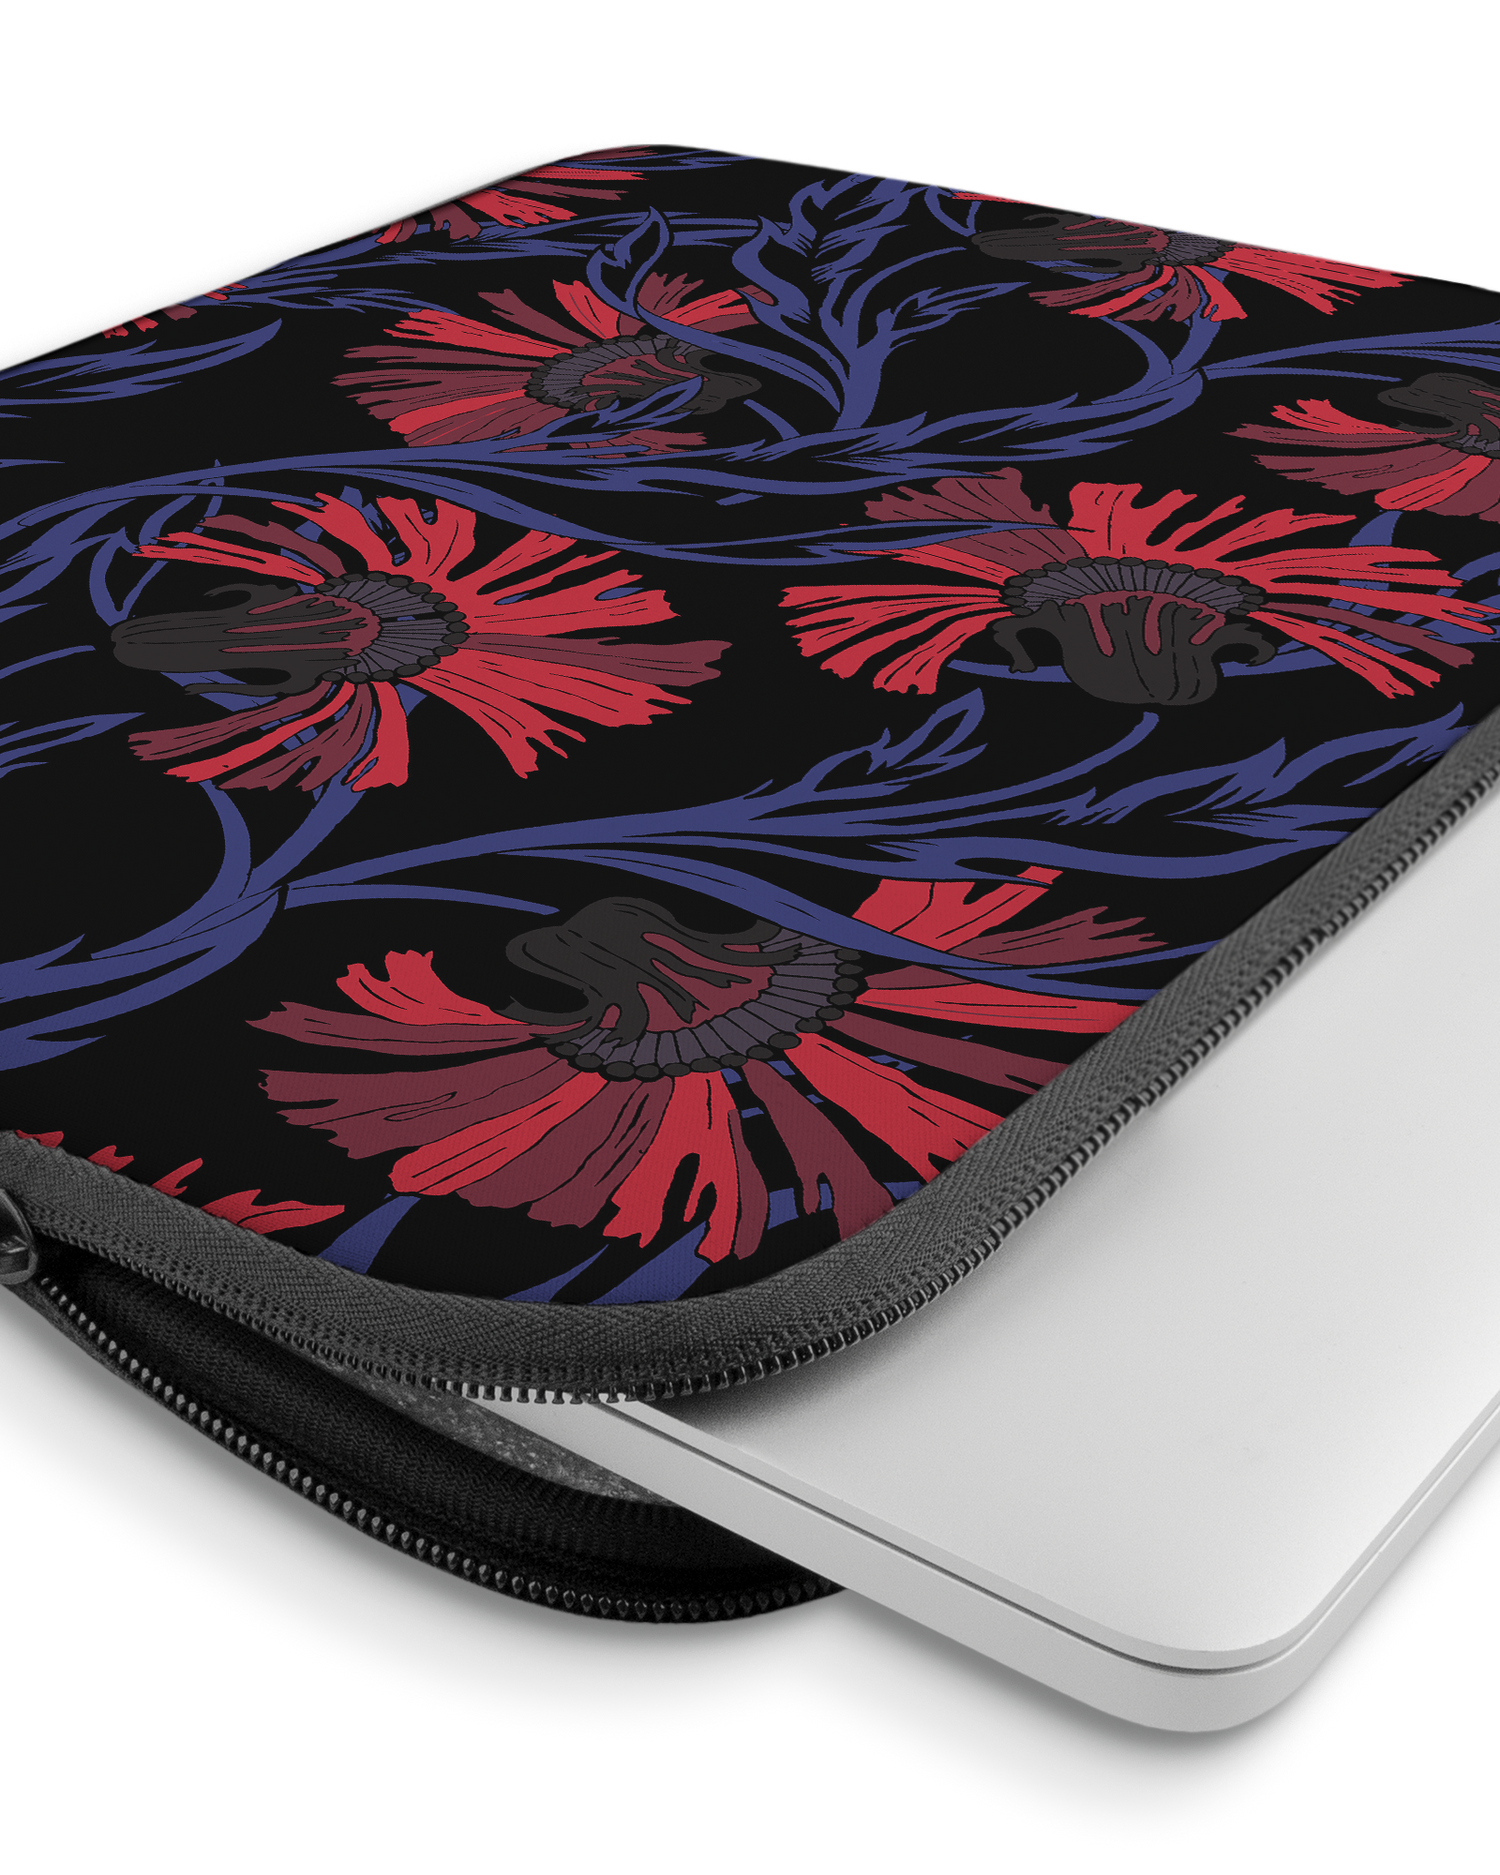 Midnight Floral Laptop Case 15 inch with device inside